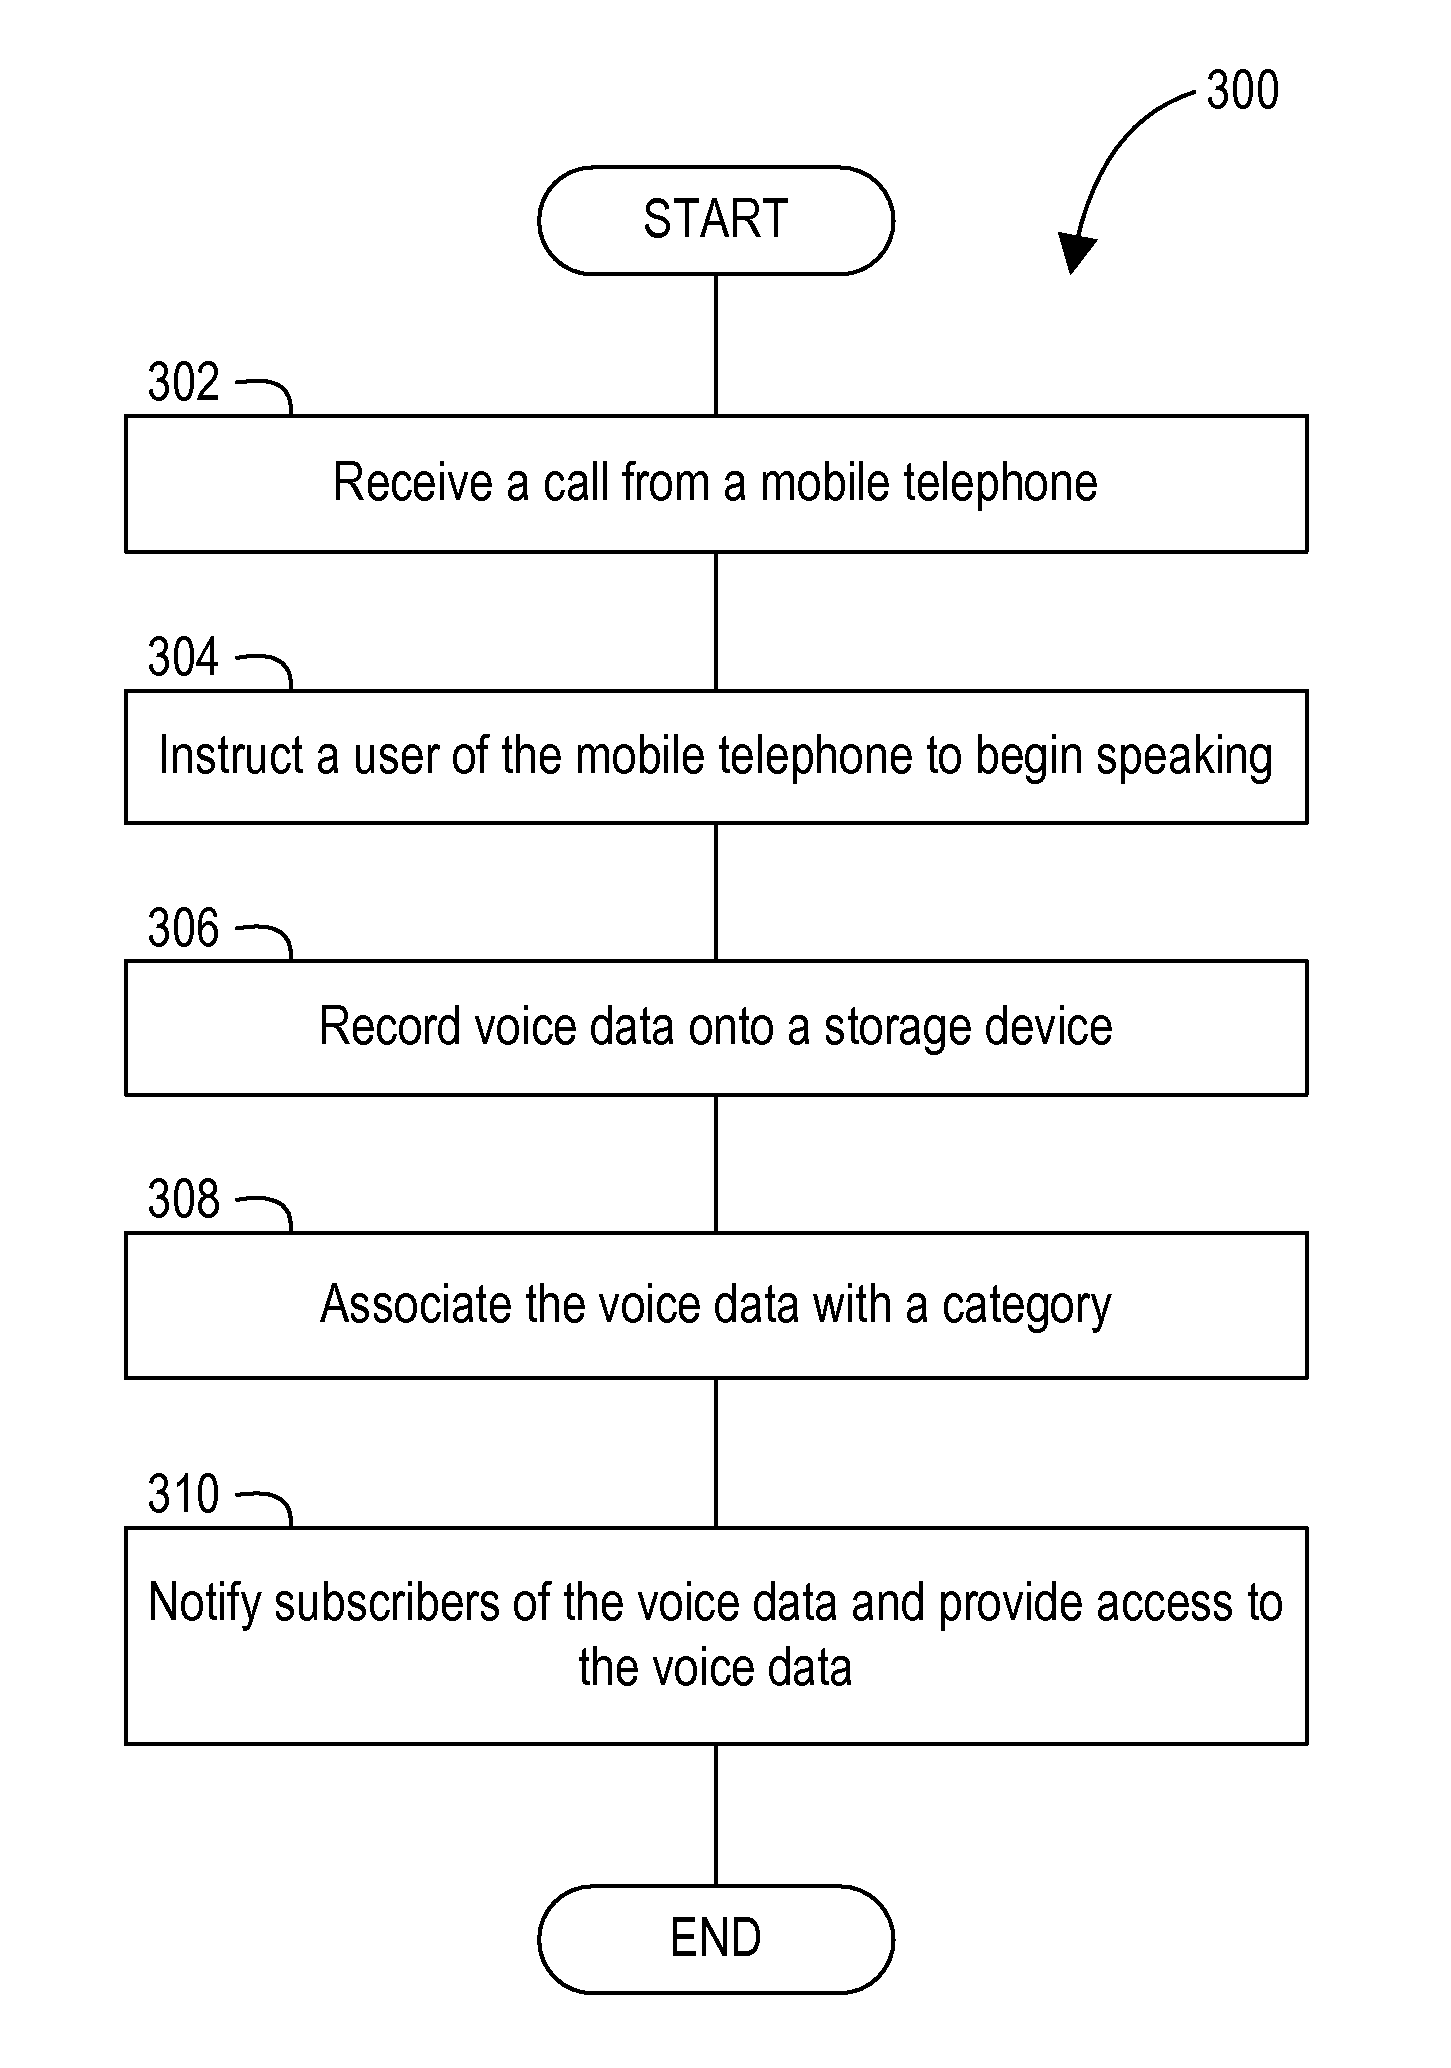 Distribution of audio content using mobile telecommunication devices